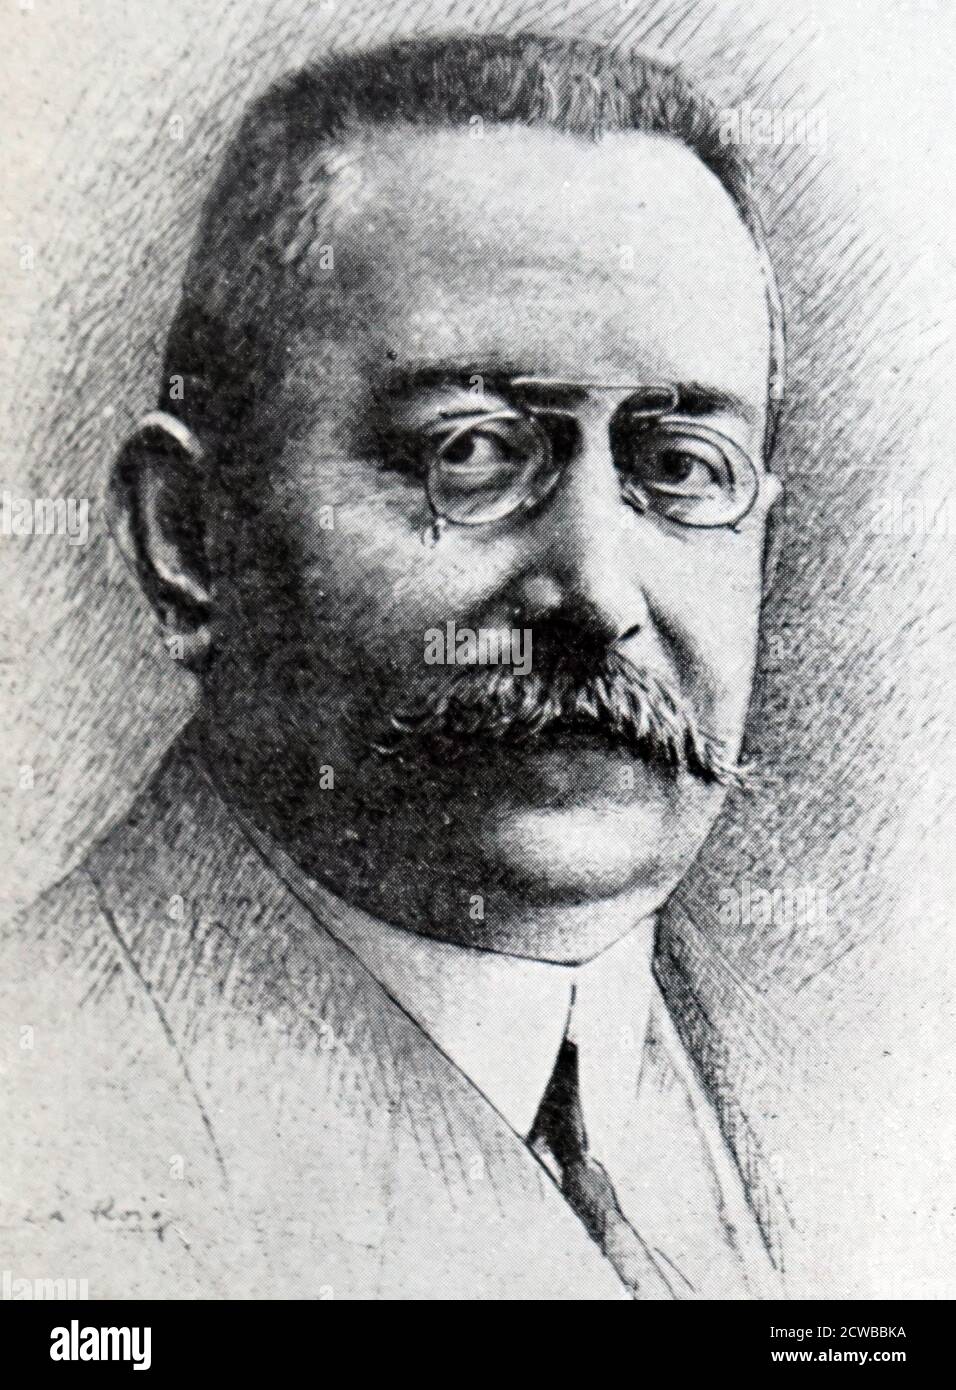 Enric Prat de la Riba ( 1870 - 1917); Catalan politician, lawyer and writer. He became the first President of the Commonwealth of Catalonia on 6 April 1914 and retained this office until his death. He wrote the book and political manifesto La nacionalitat catalana in which greater autonomy to Catalonia was advocated. Stock Photo